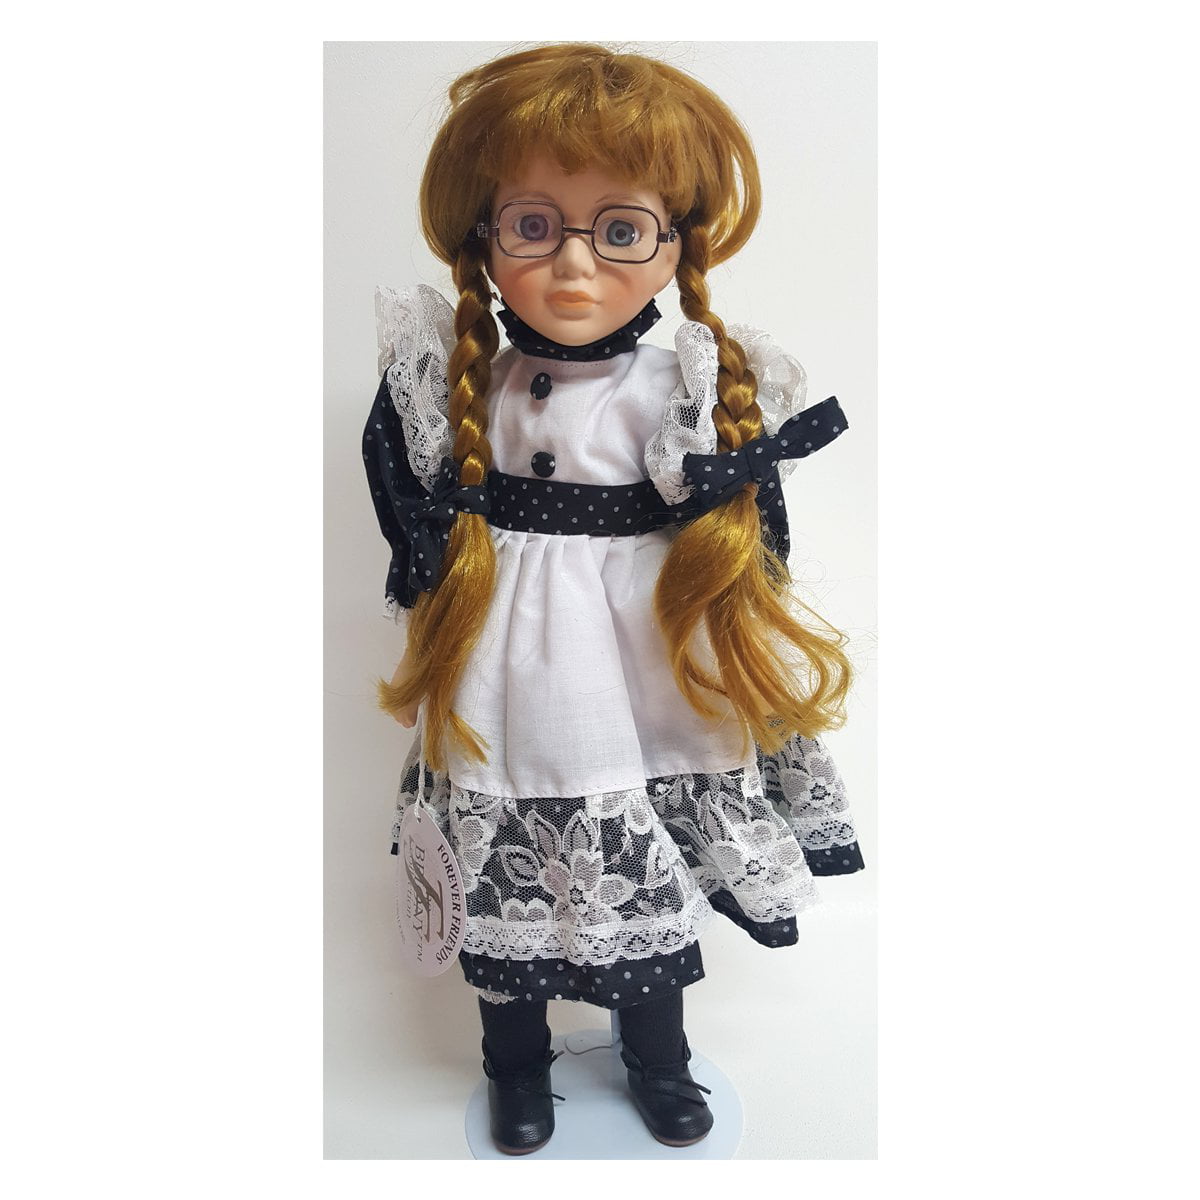 Collectible Doll 90s Doll Strawberry Blonde Hair Glass Eyes Birthday Gift For Daughter 19-Inch Porcelain Doll Plaid Blue Jumper